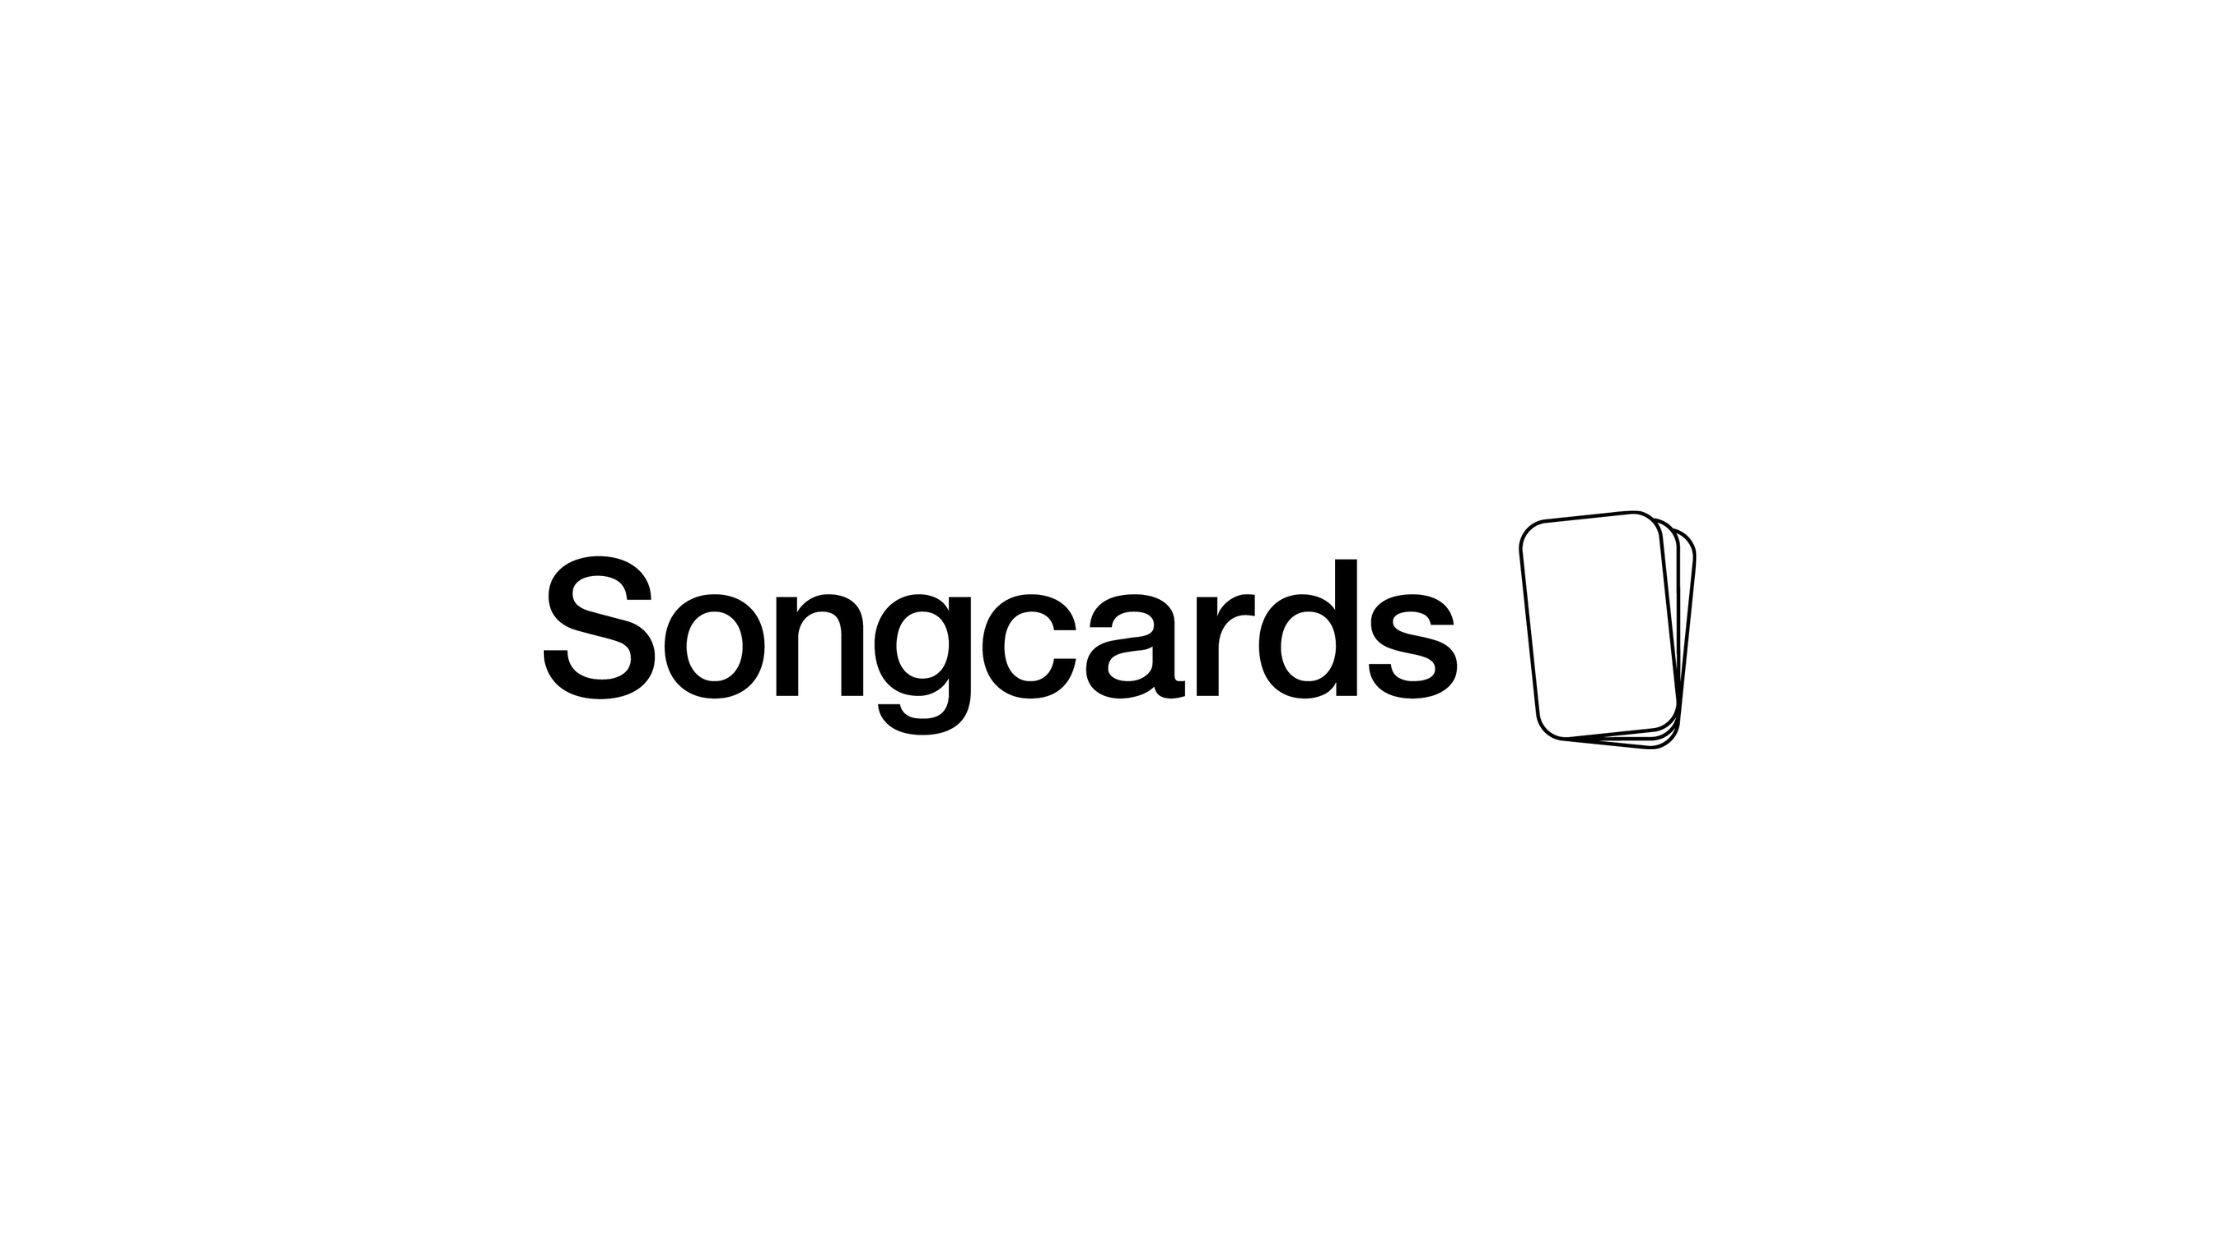 How Songcards is making digital music collectable again